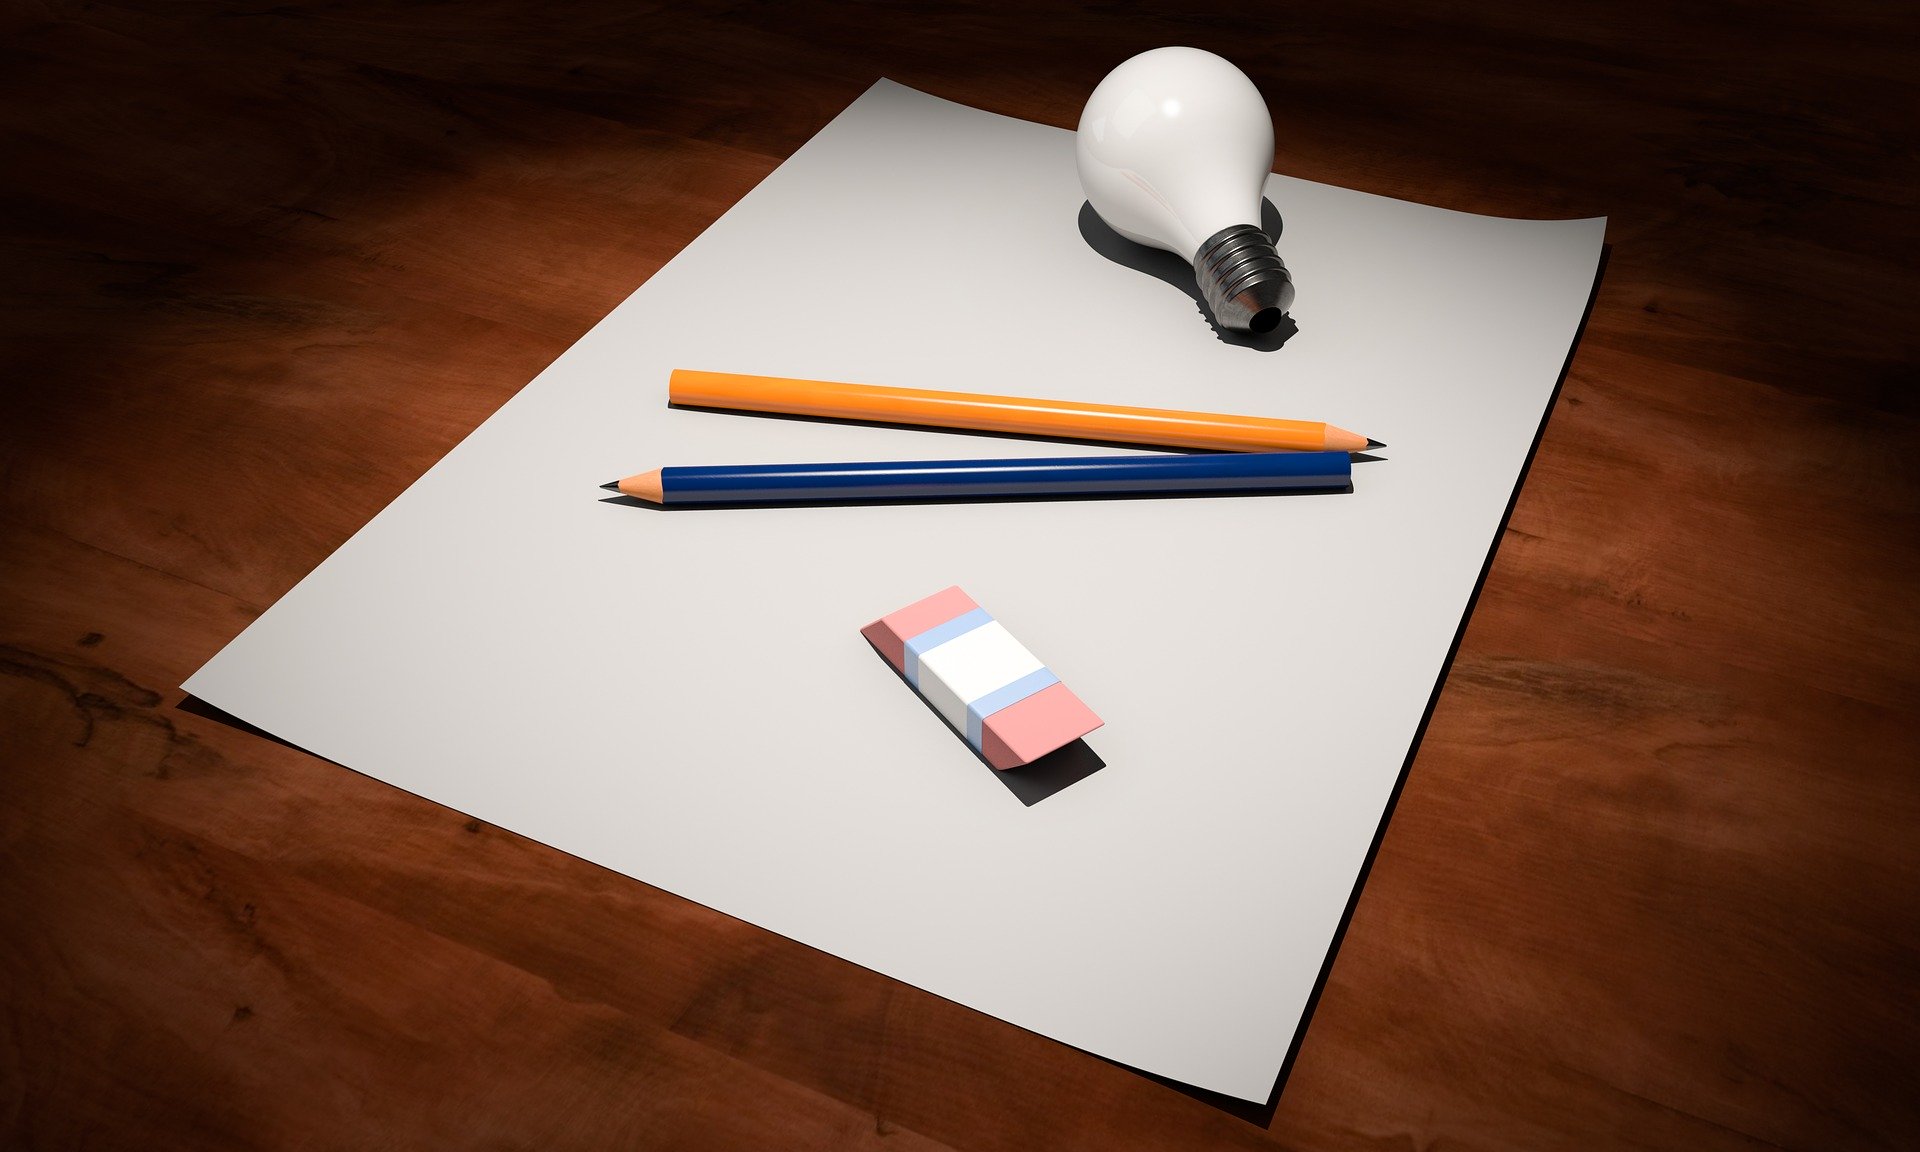 A piece of paper with pencils, eraser, and lightbulb